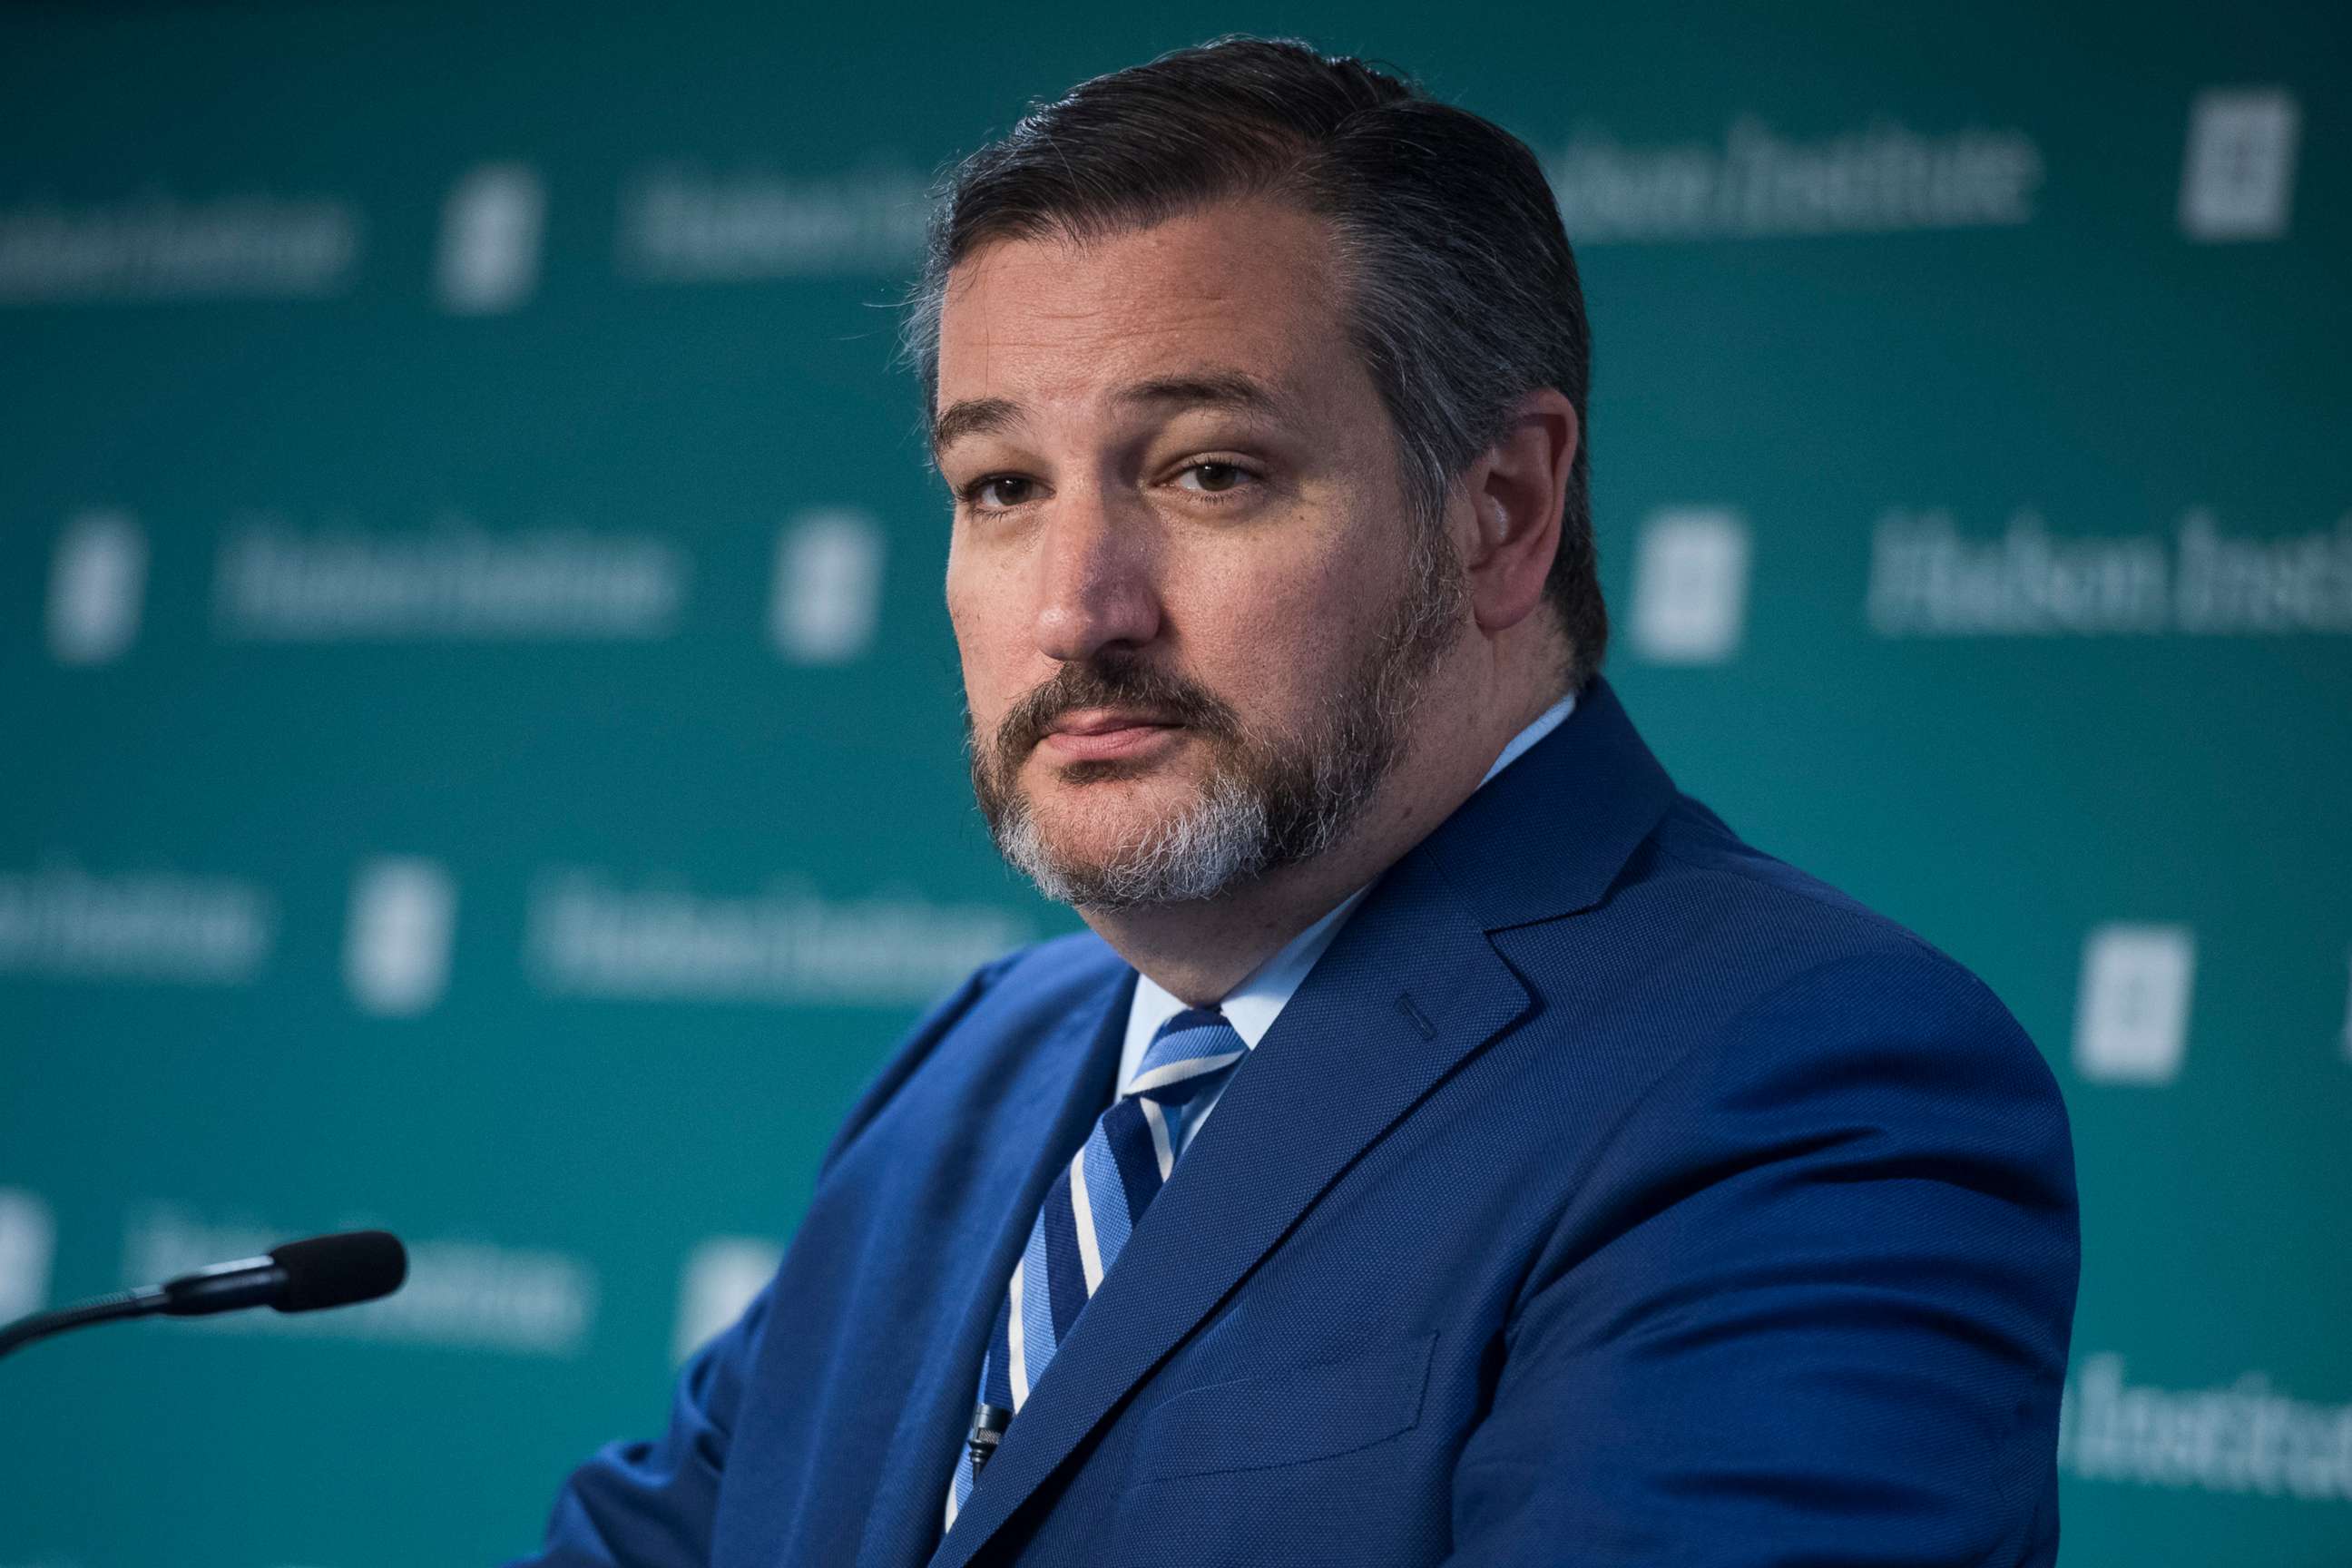 PHOTO: Sen. Ted Cruz speaks during a discussion titled Interventionism vs. Isolationism at the Hudson Institute in Washington, September 3, 2019.